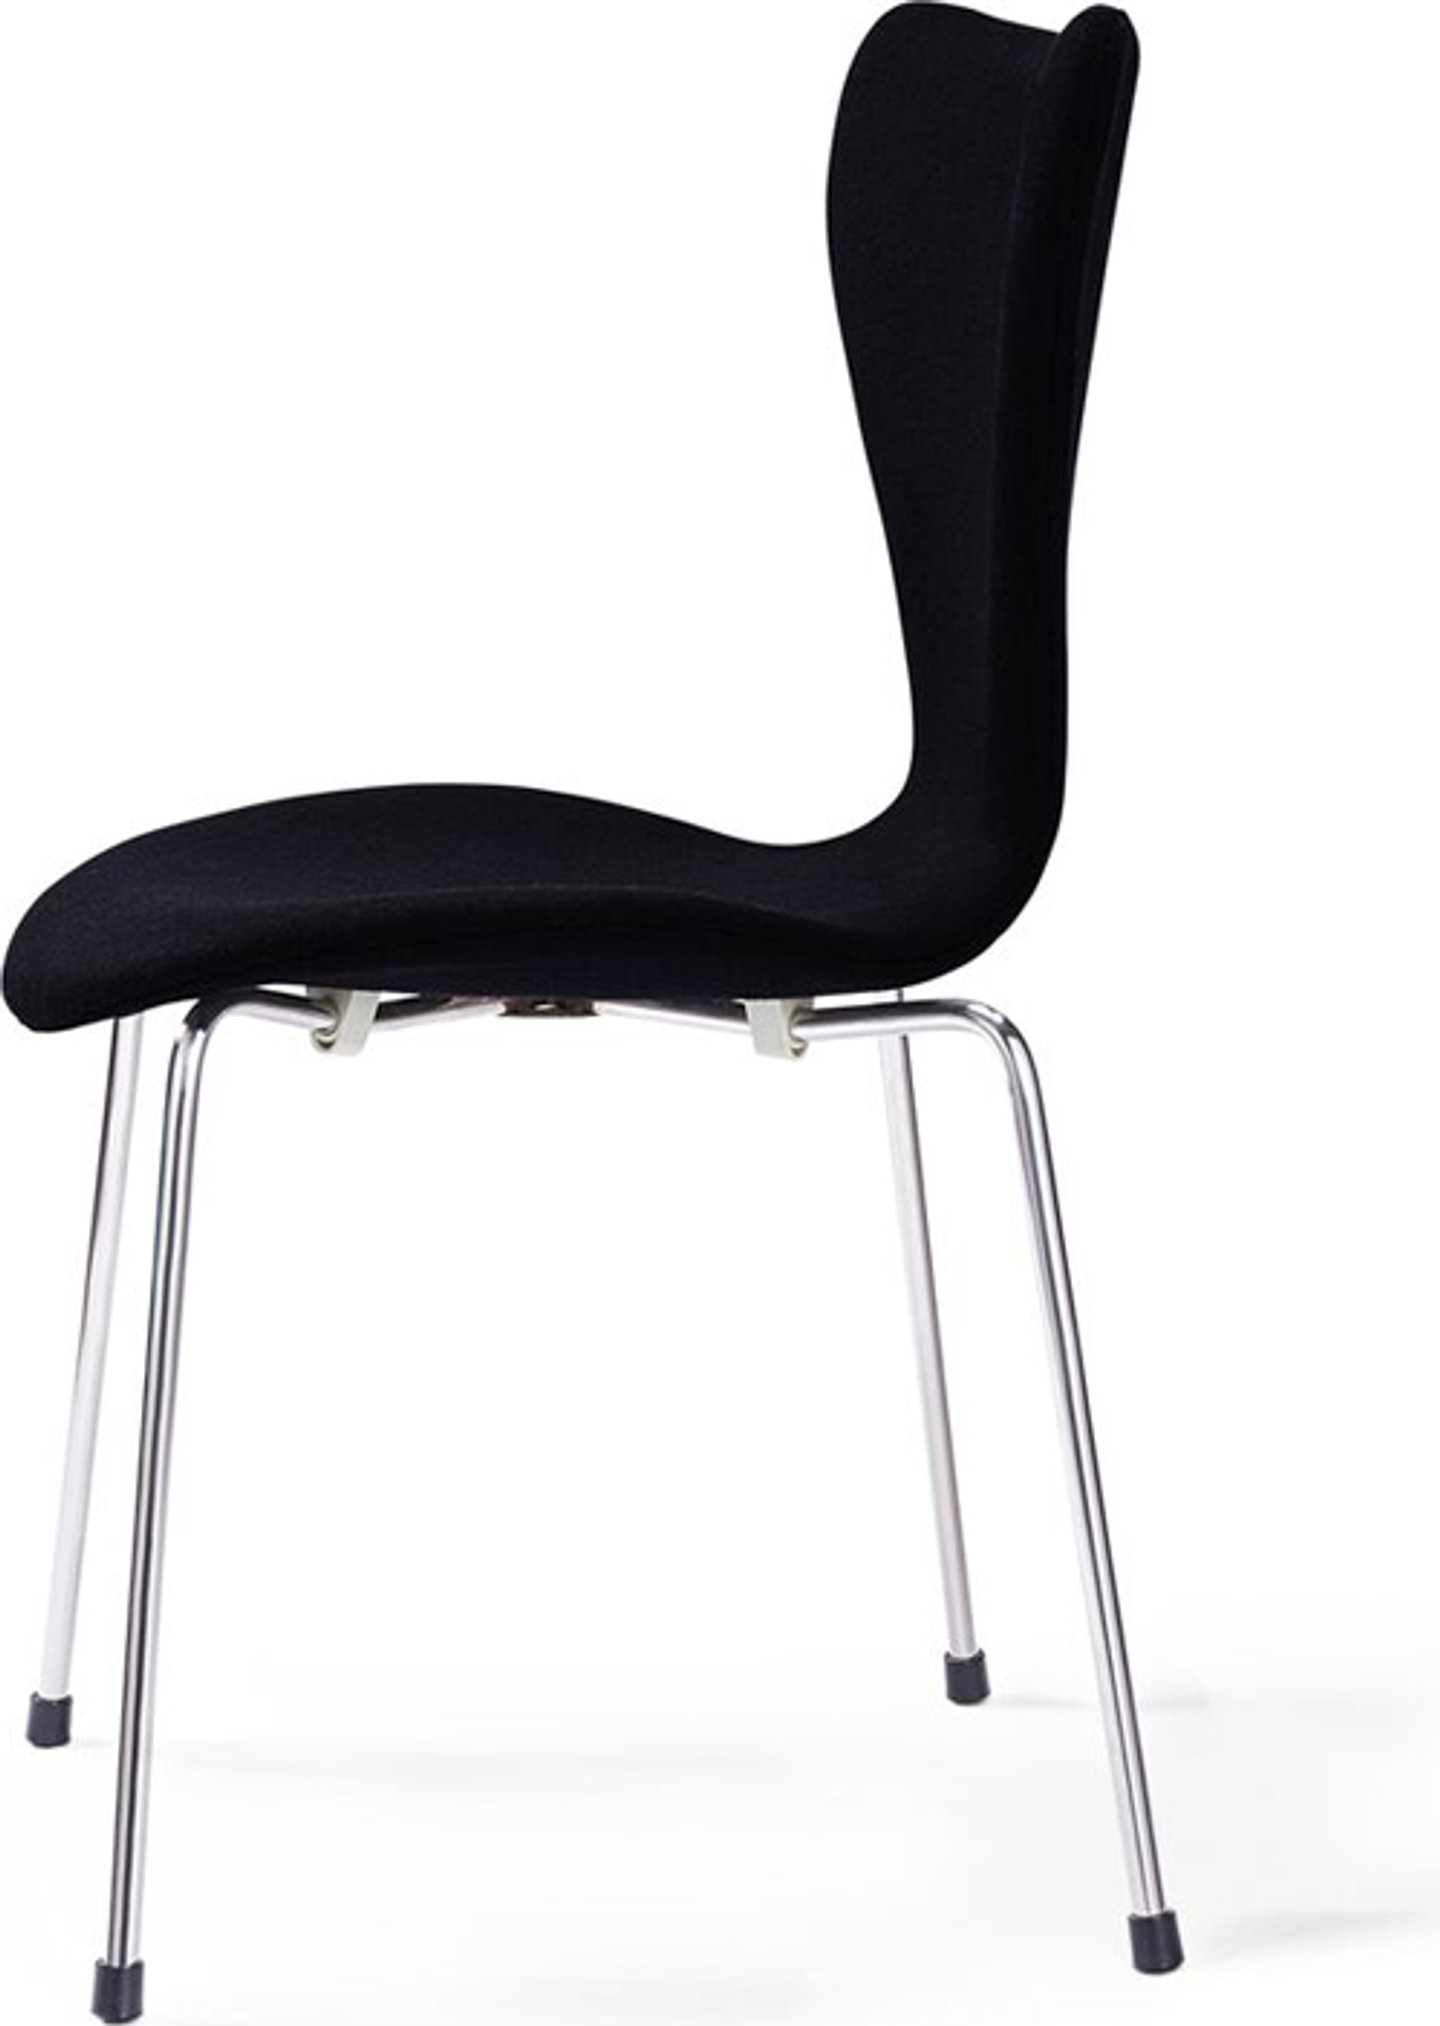 Series 7 Chair Upholstered Black image.